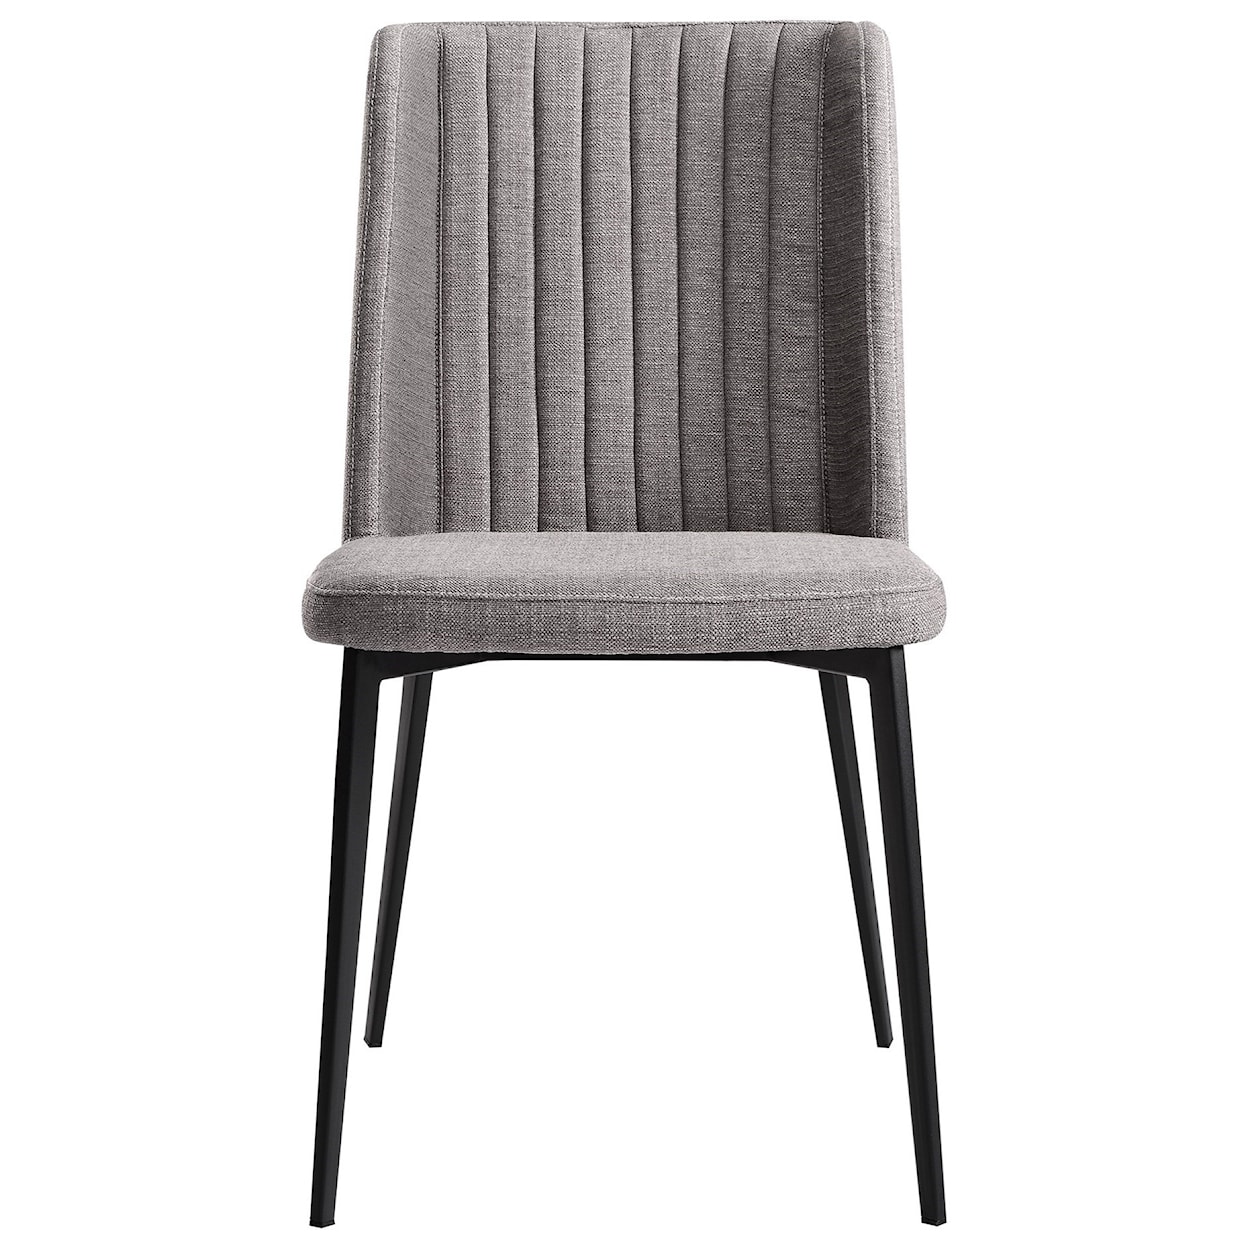 Armen Living Maine Contemporary Dining Chair - Set of 2